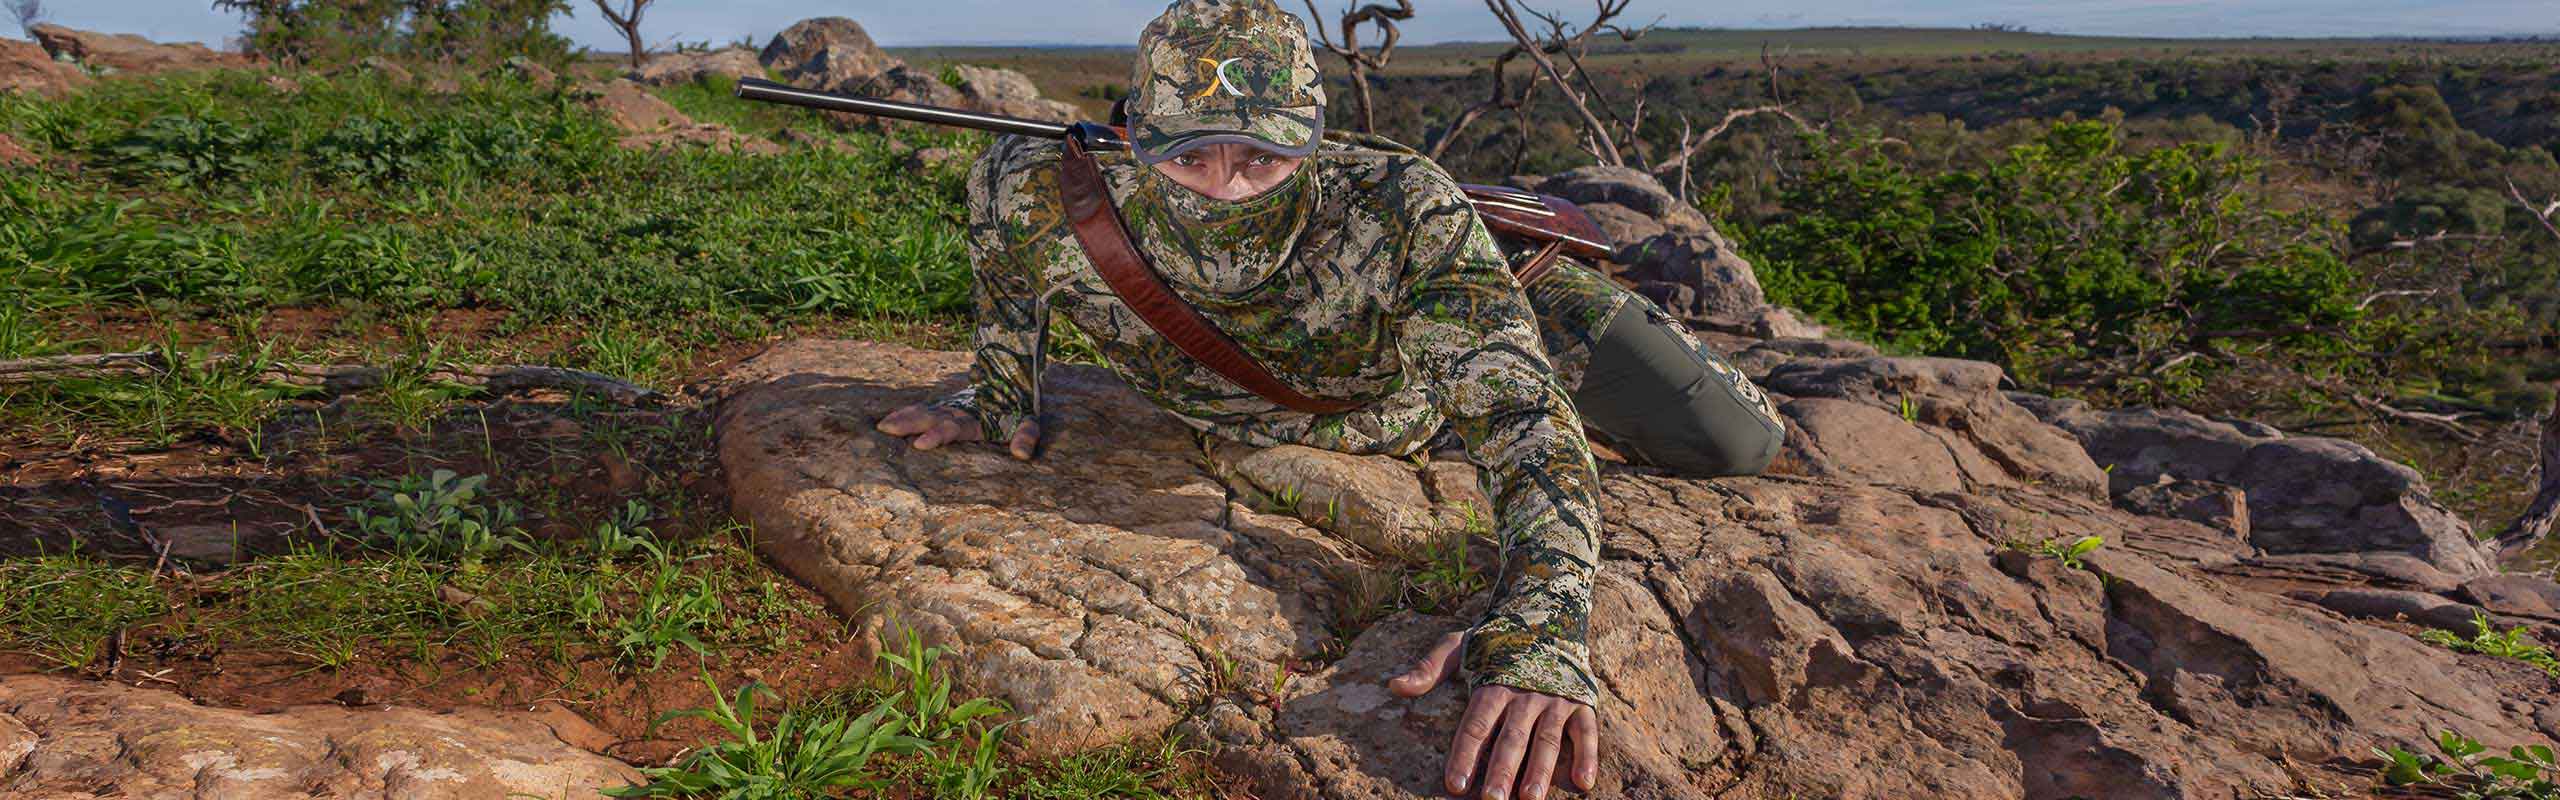 Performance Driven Hunting Apparel and Camouflage Clothing - TUSX